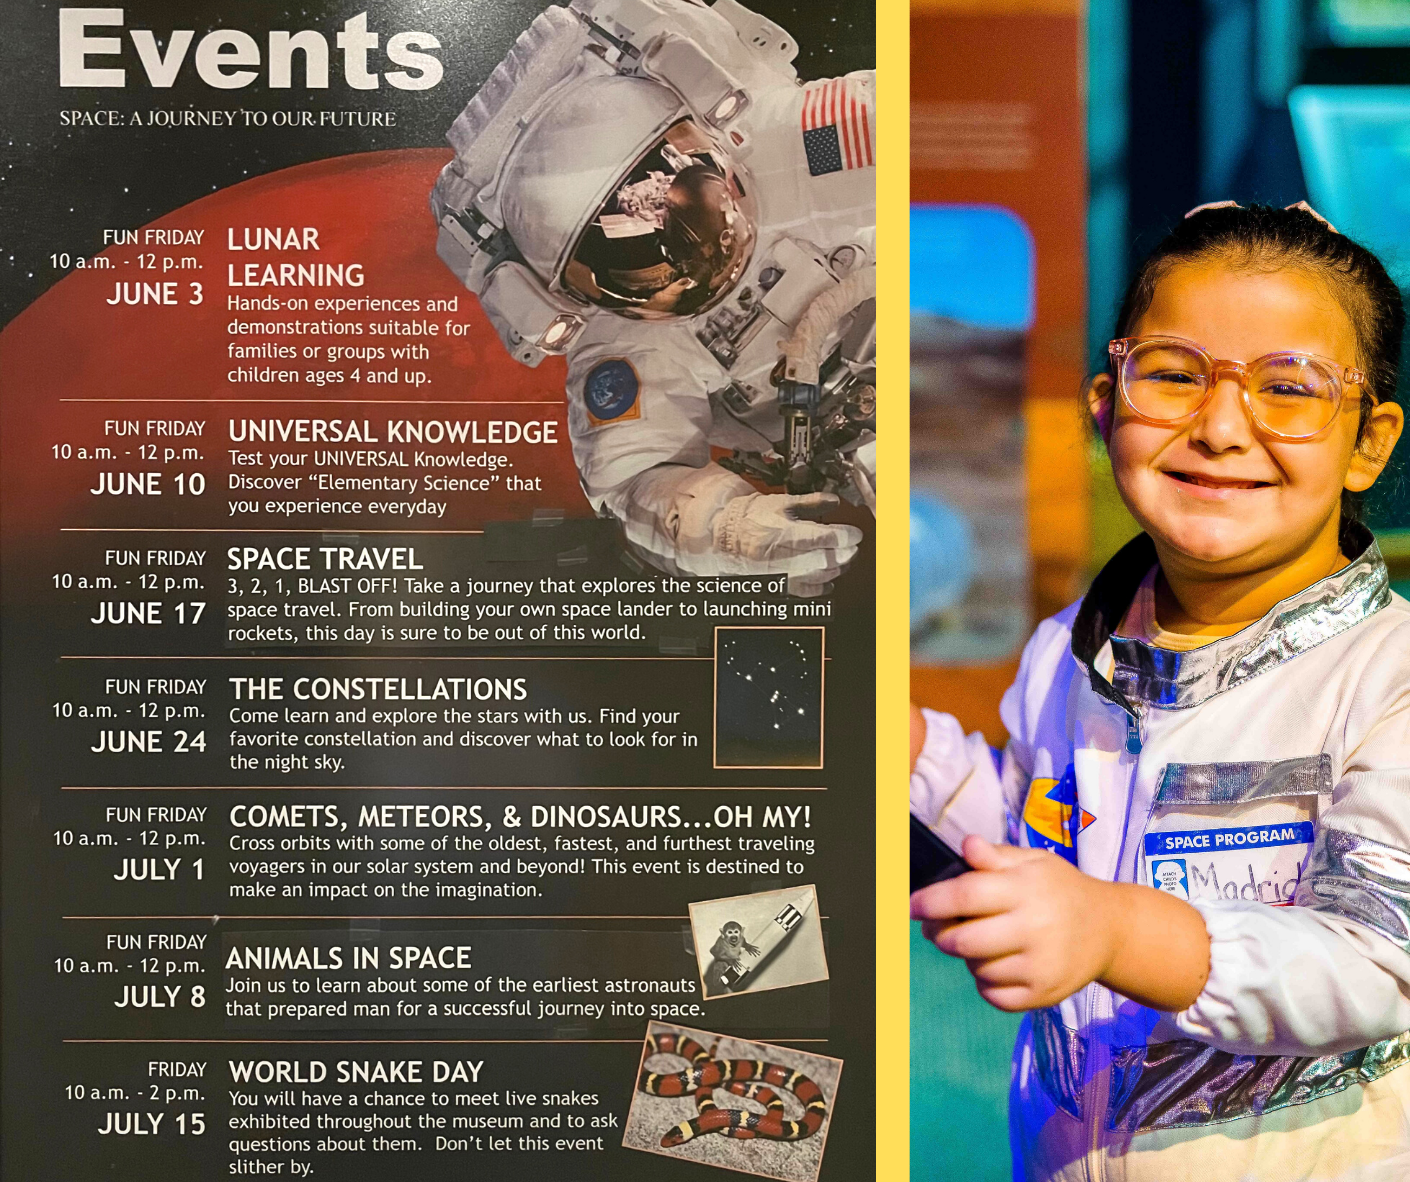 space exhibit events at mississippi museum of natural science